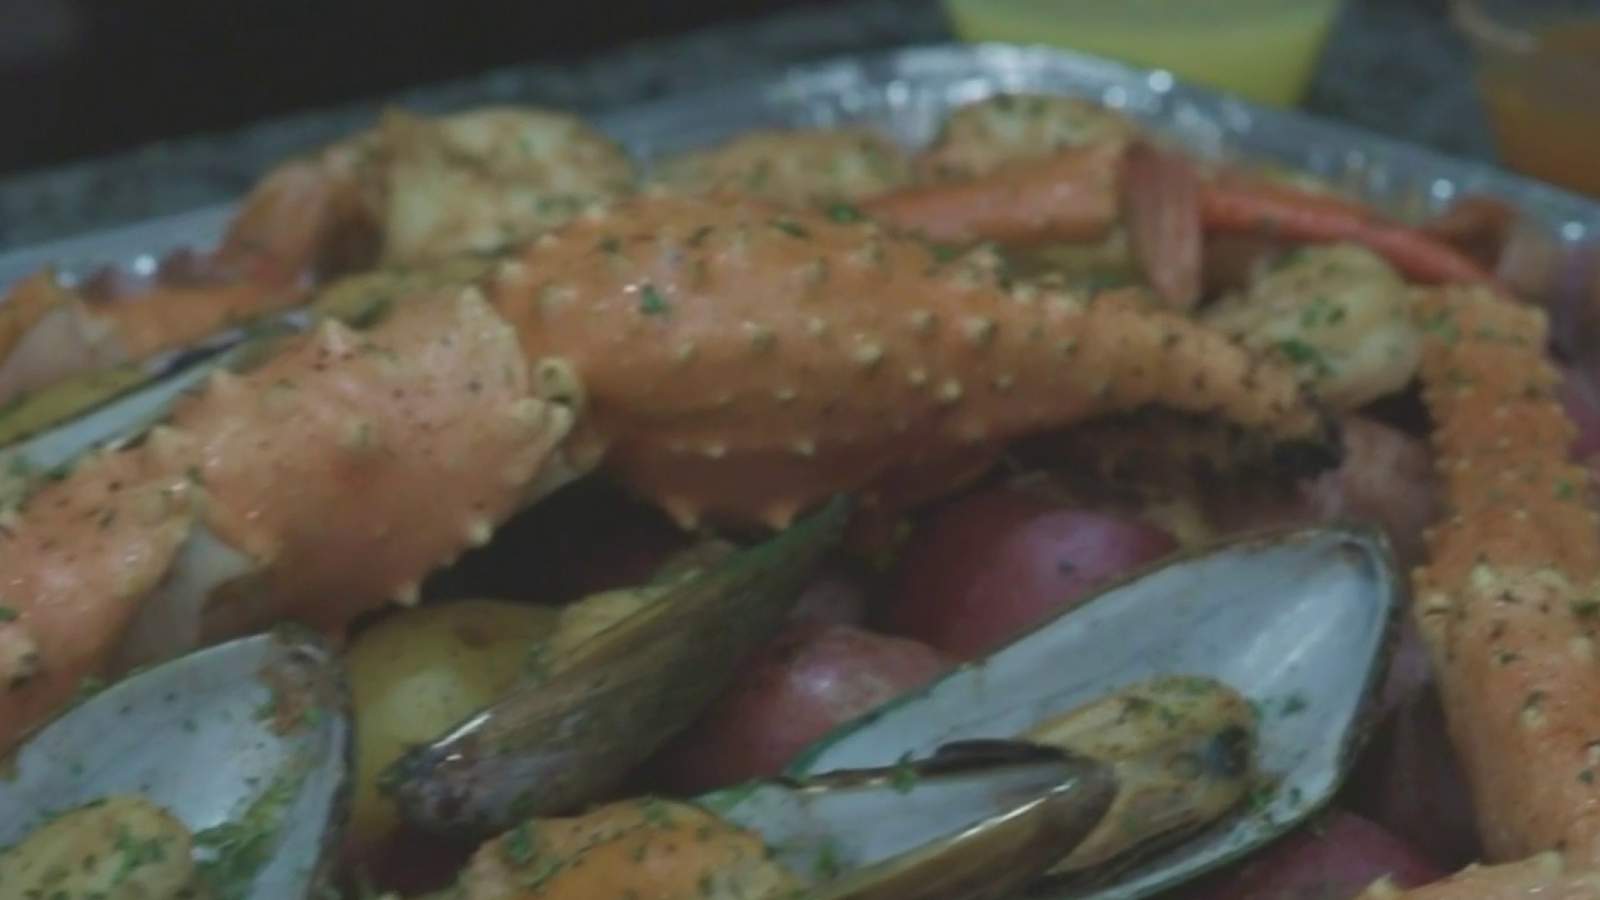 Tasty Tuesday recipe: Curt Got Crabs Seafood Boil